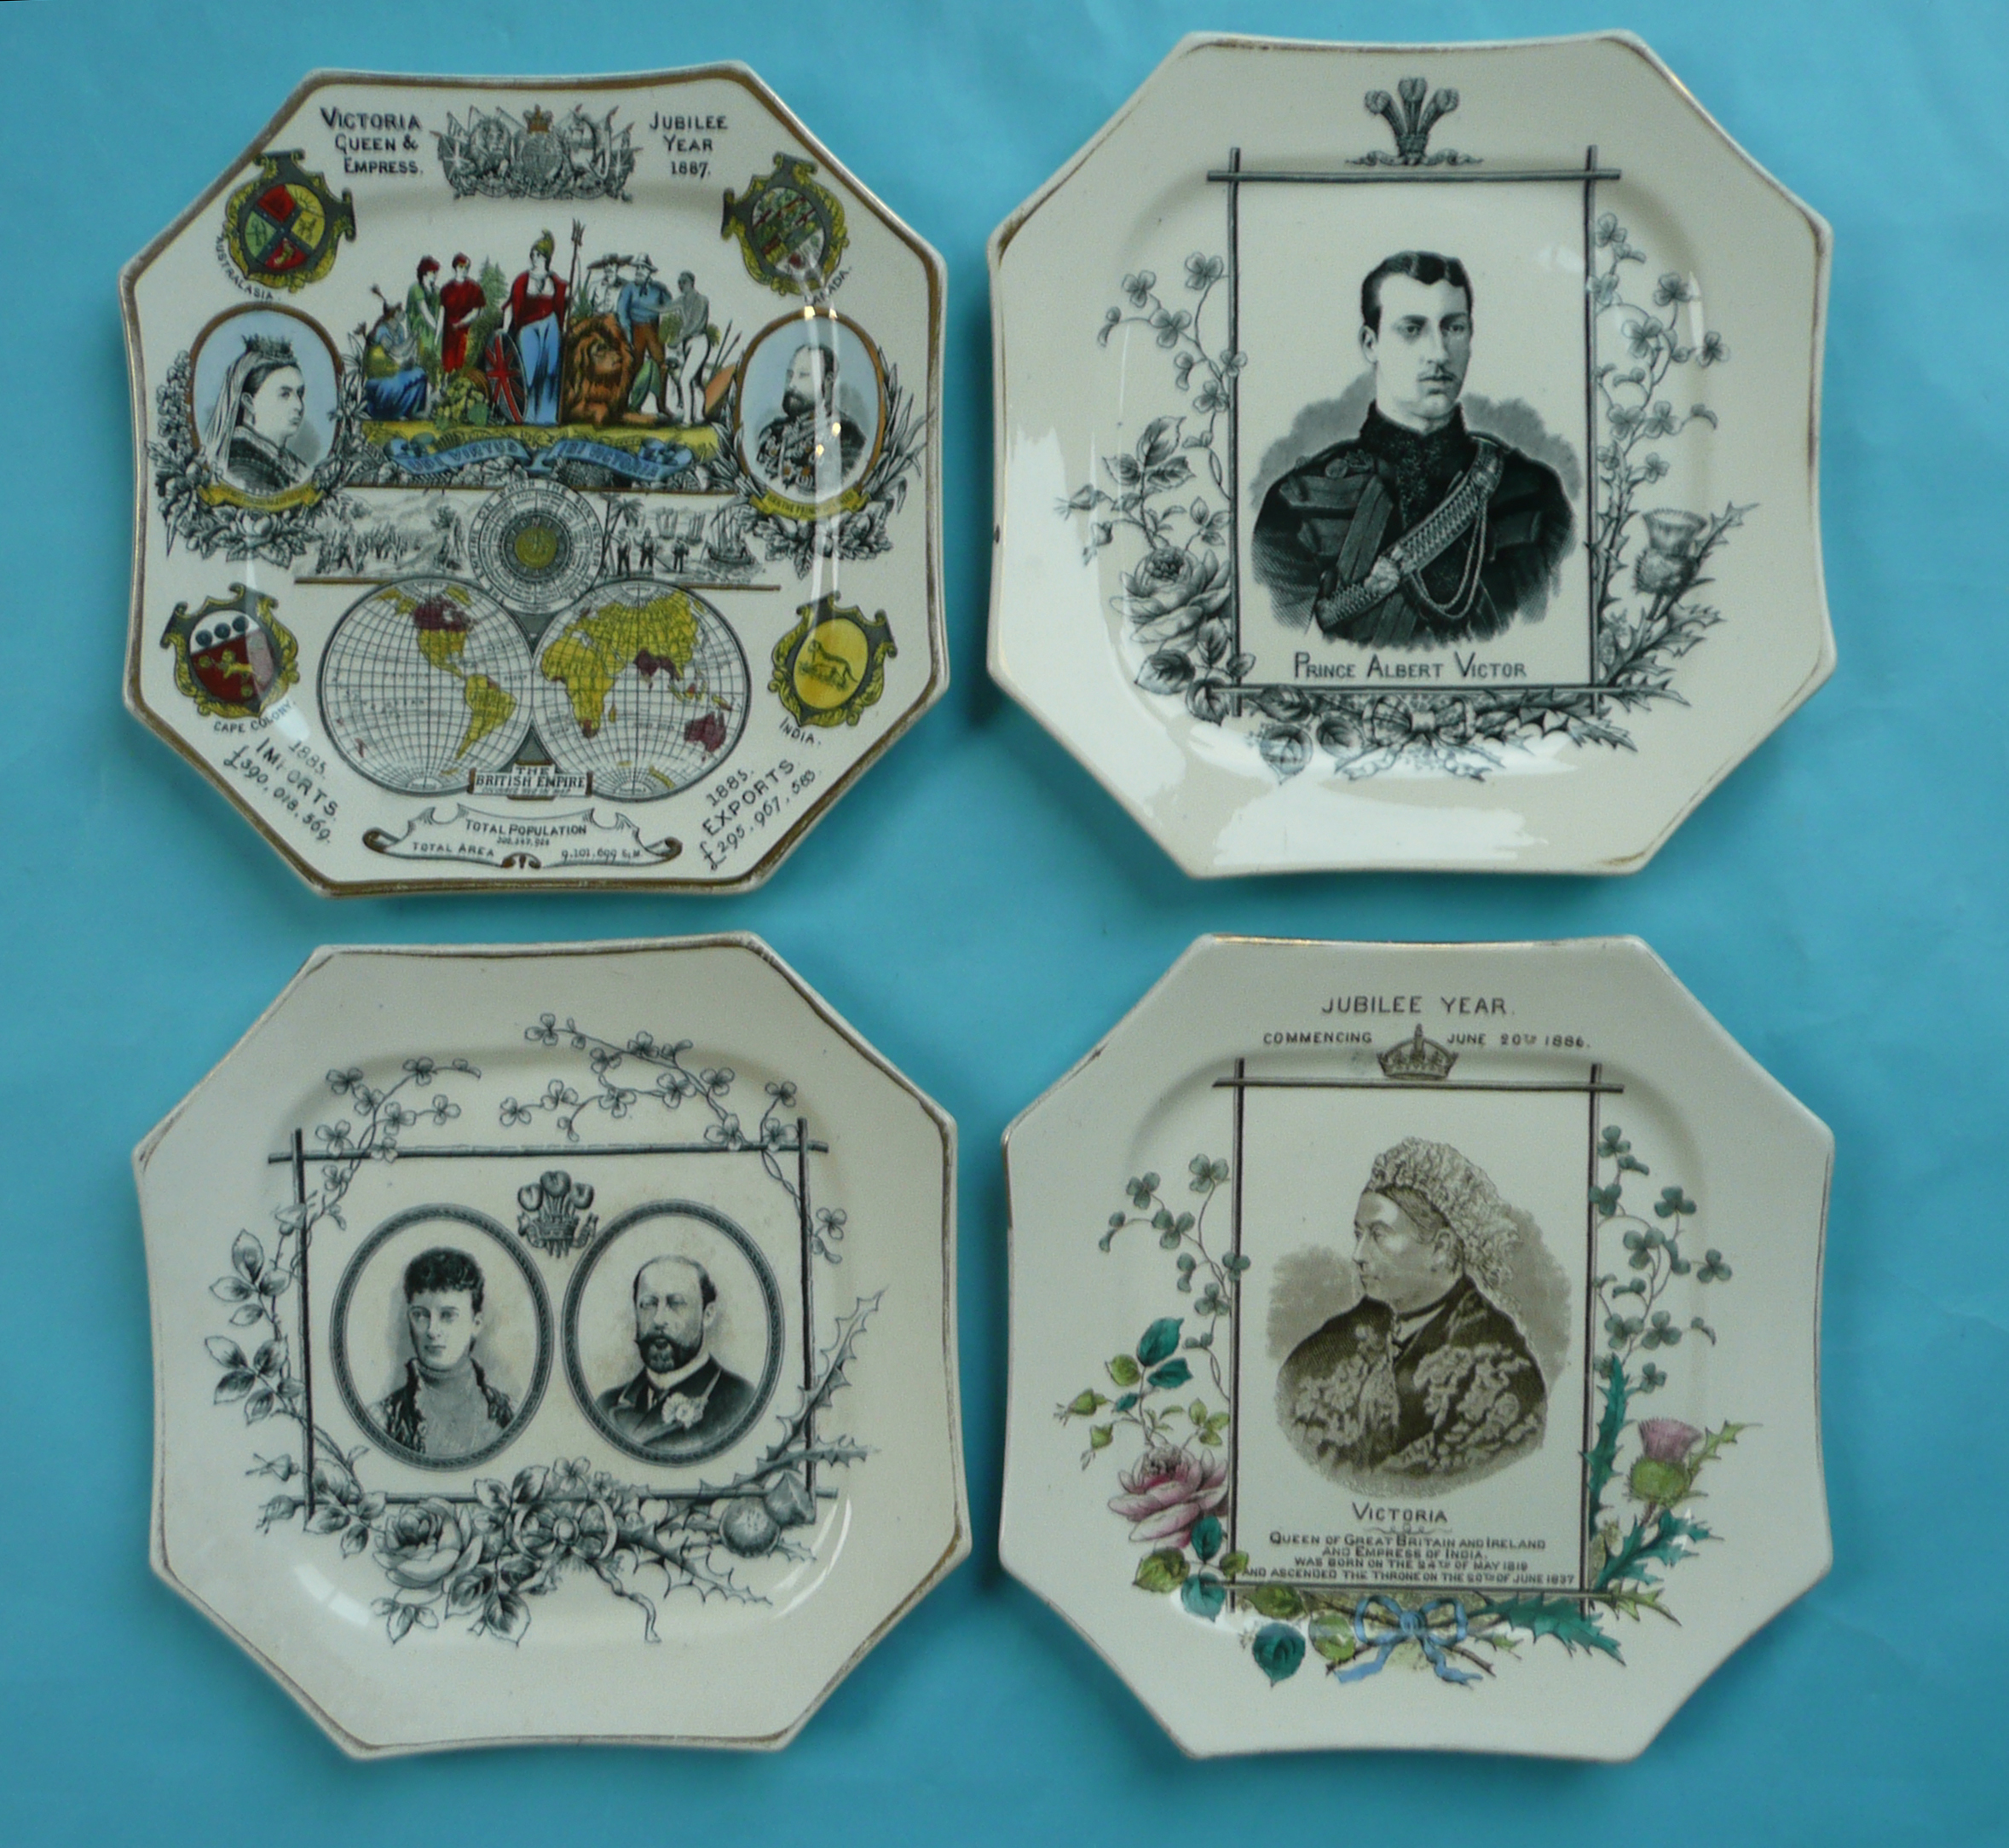 A highly decorated ‘Statistics’ plate; Prince Albert Victor; Prince and Princess of Wales and ‘